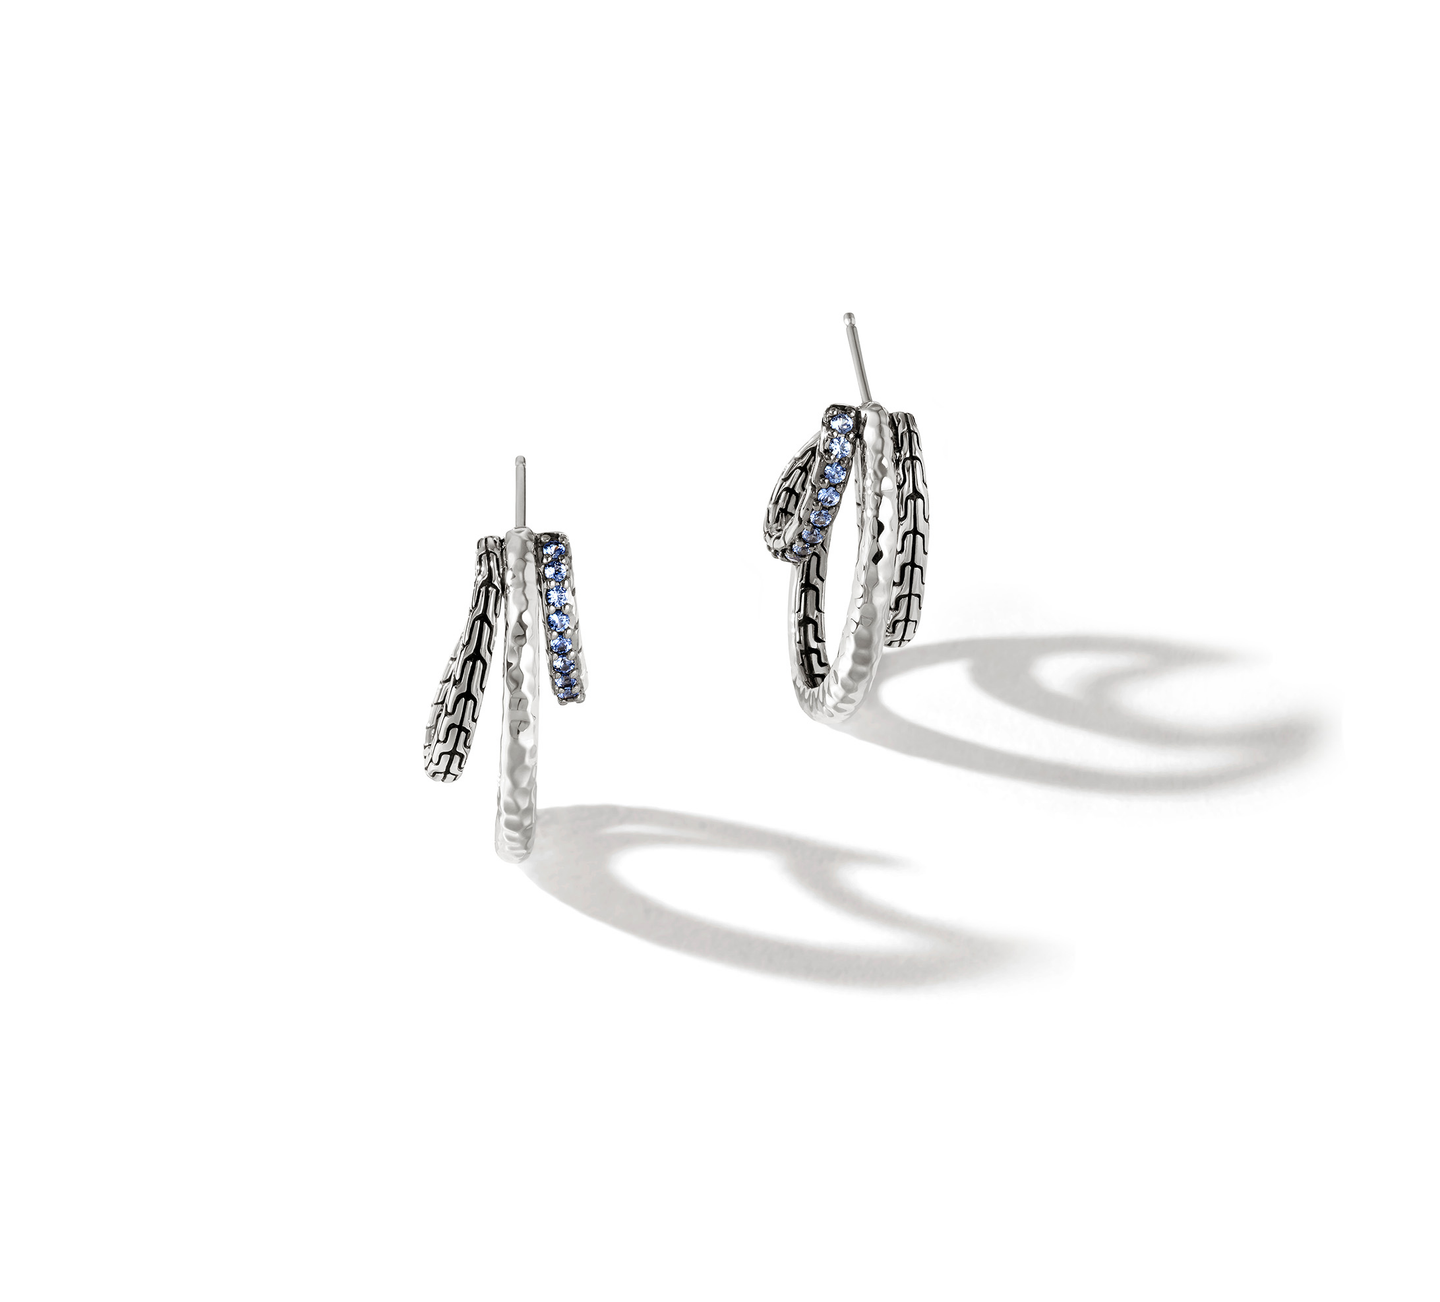 John Hardy Hammered Silver Earrings with Blue Sapphire